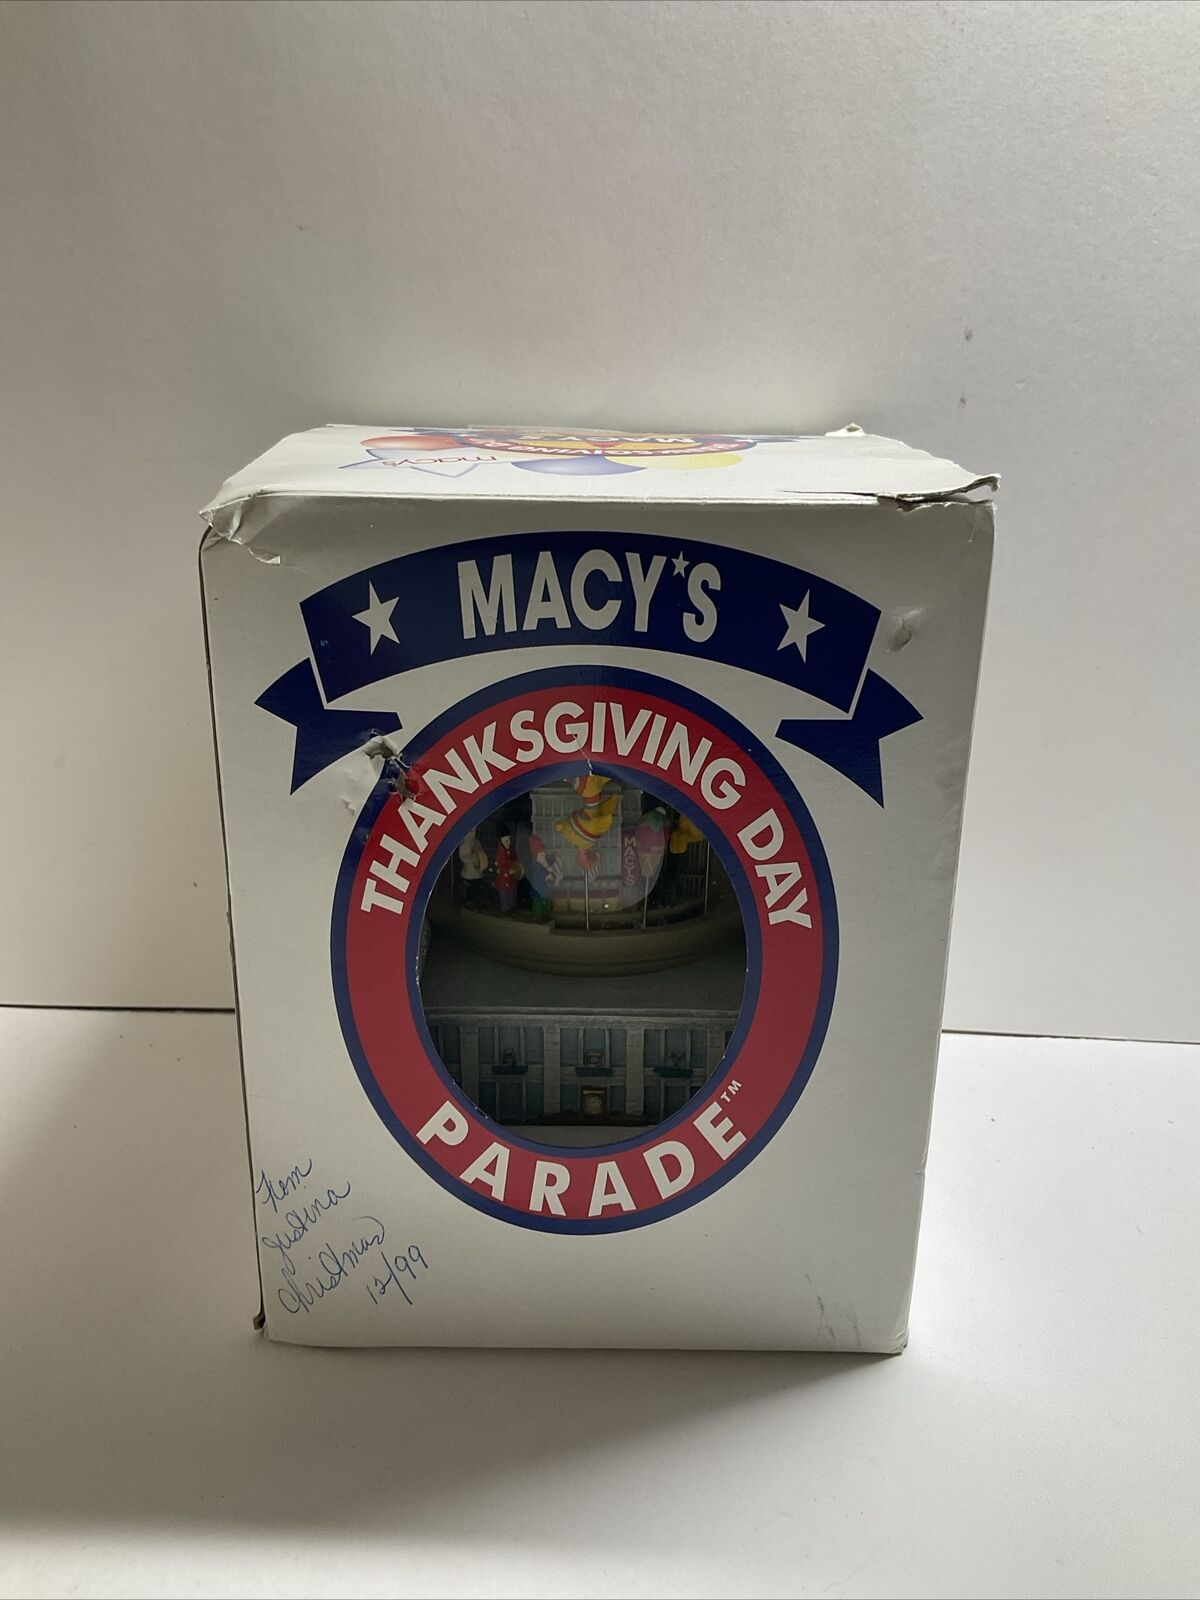 Macy’s Thanksgiving Day Parade 1999 Snow Globe - Box - Works - Fast 